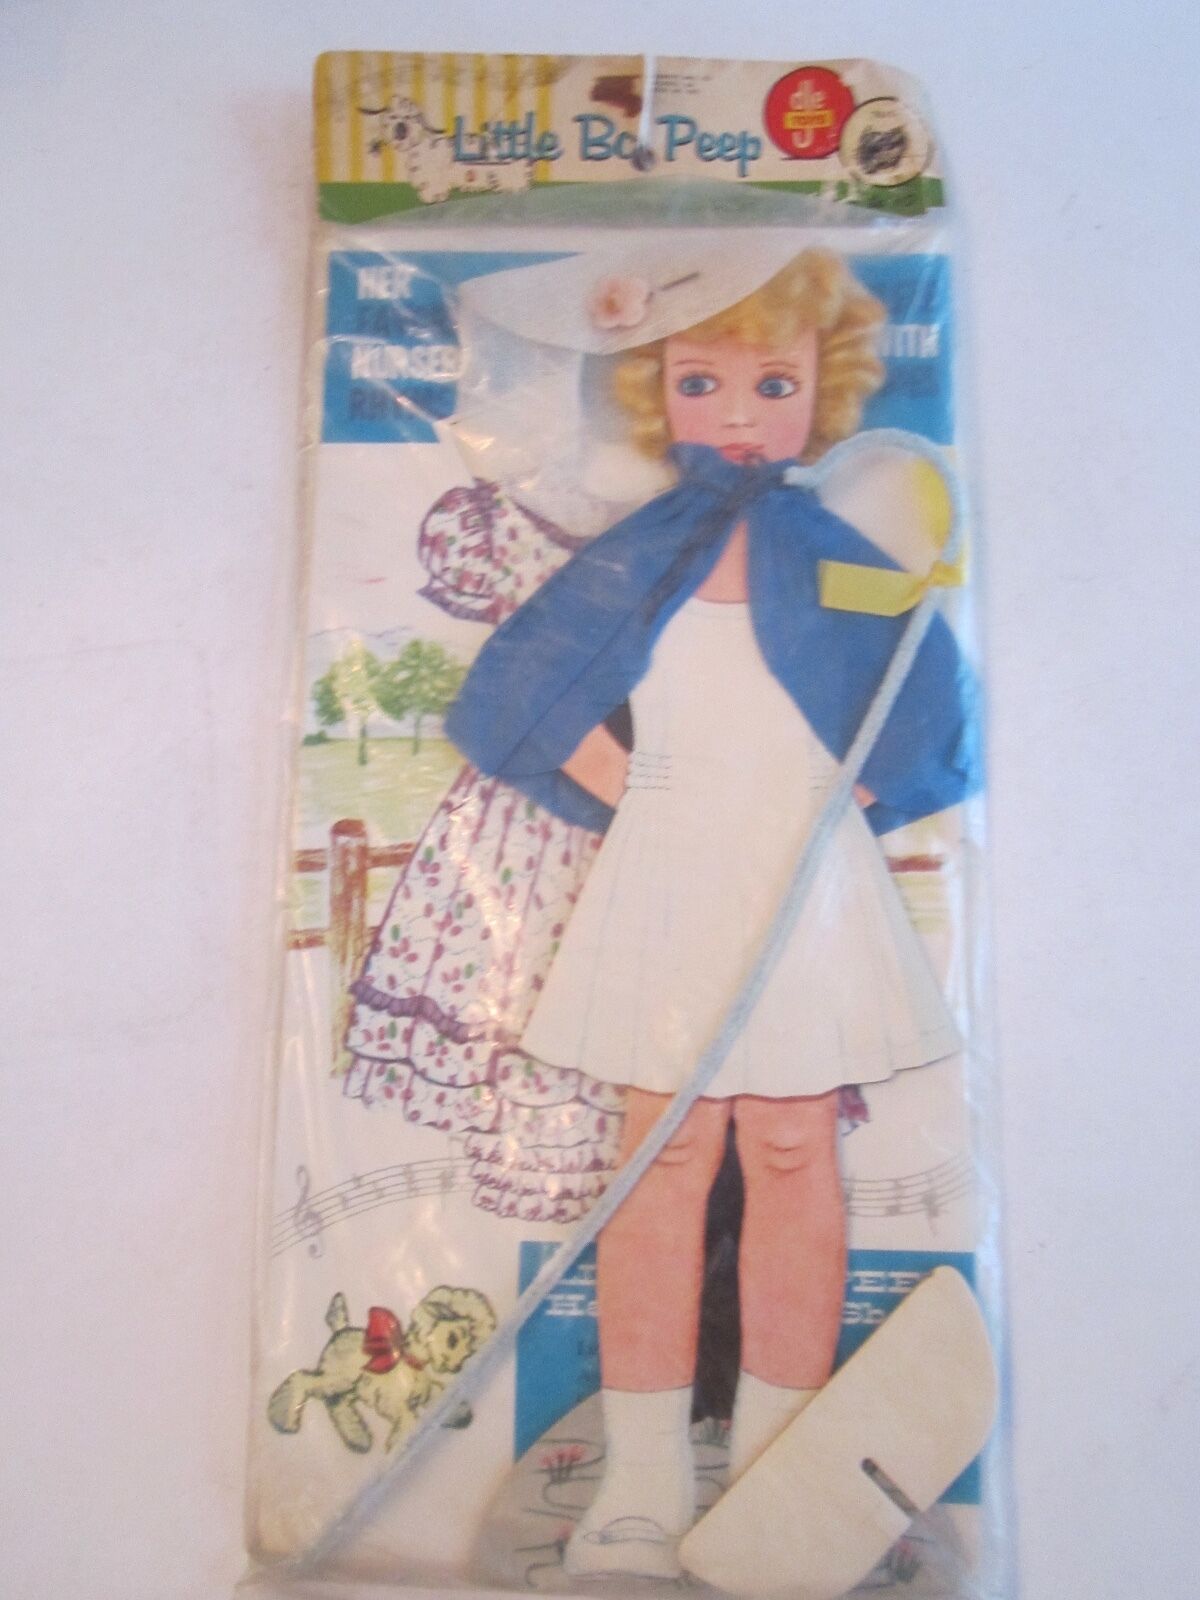 NOS 1950\'S LITTLE BO PEEP PAPER DOLL IN THE ORIGINAL WRAPPING - UNUSED  - TUB BP